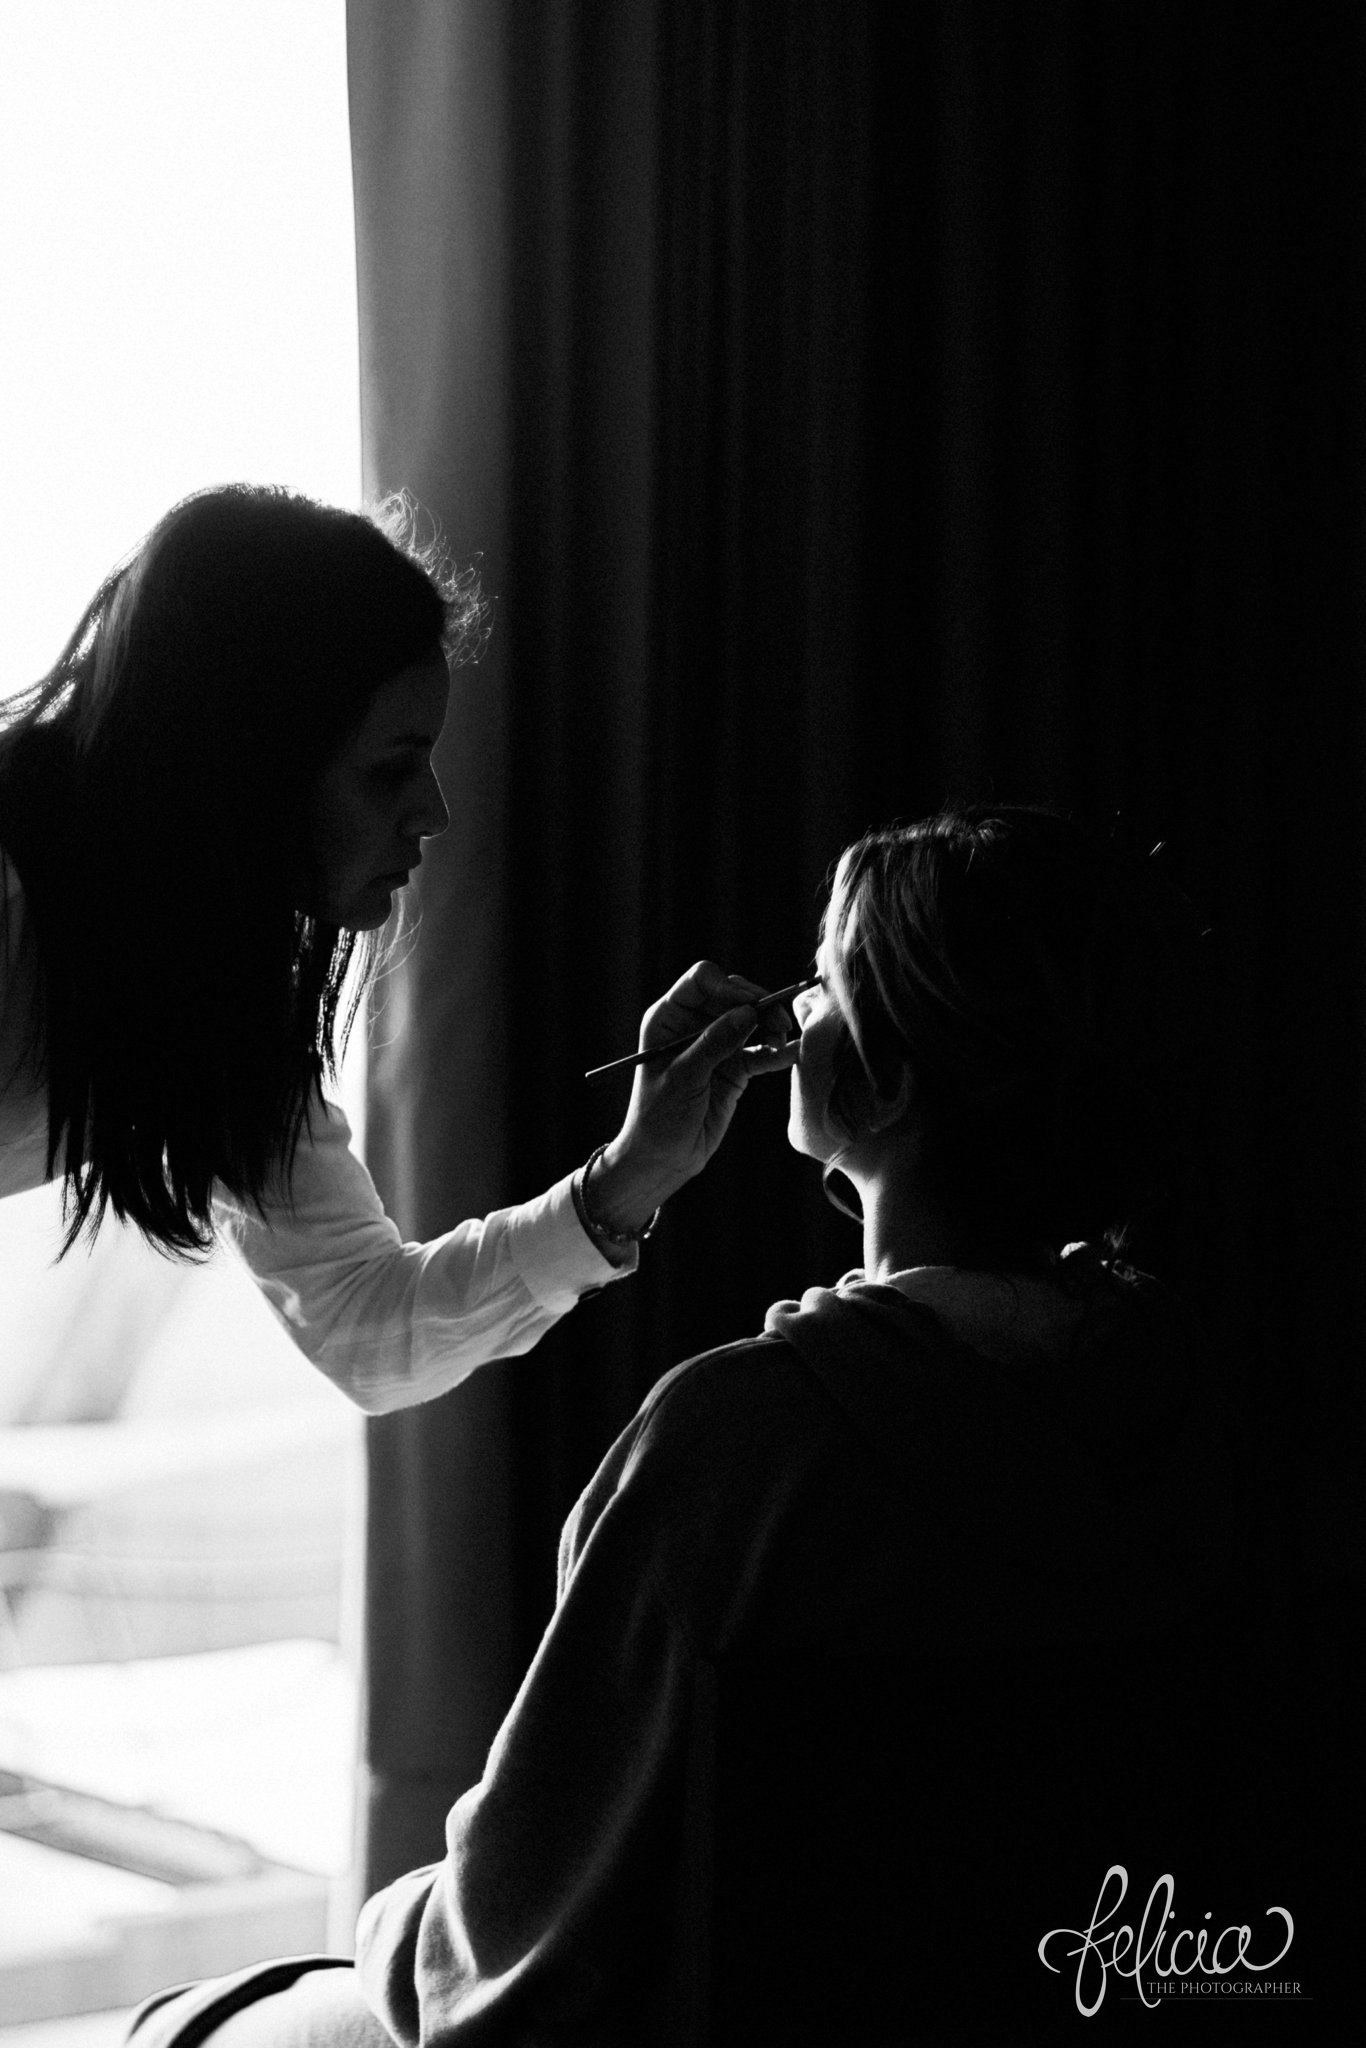 images by feliciathephotographer.com | Destination Beach Wedding | Unicco 20 87 | Photographer | L&S Travel | getting ready | makeup | details | silhouette | black and white  